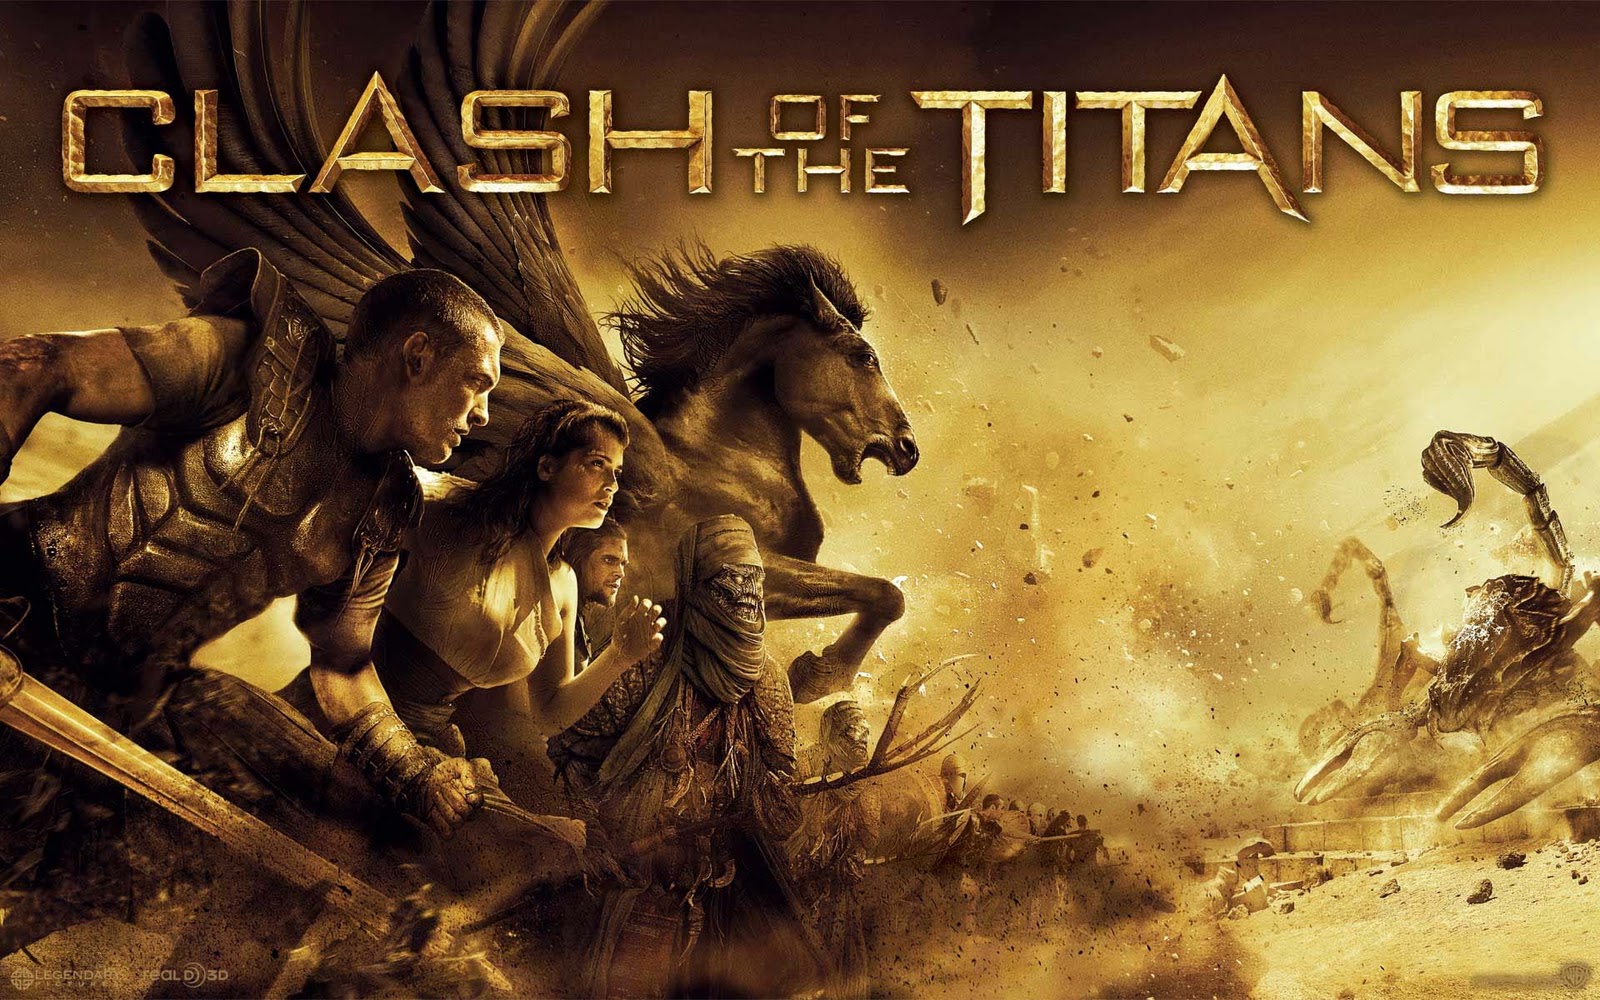 Rosamund Pike's Clash of the Titans 2 film is now officially titled 'Wrath  of the Titans